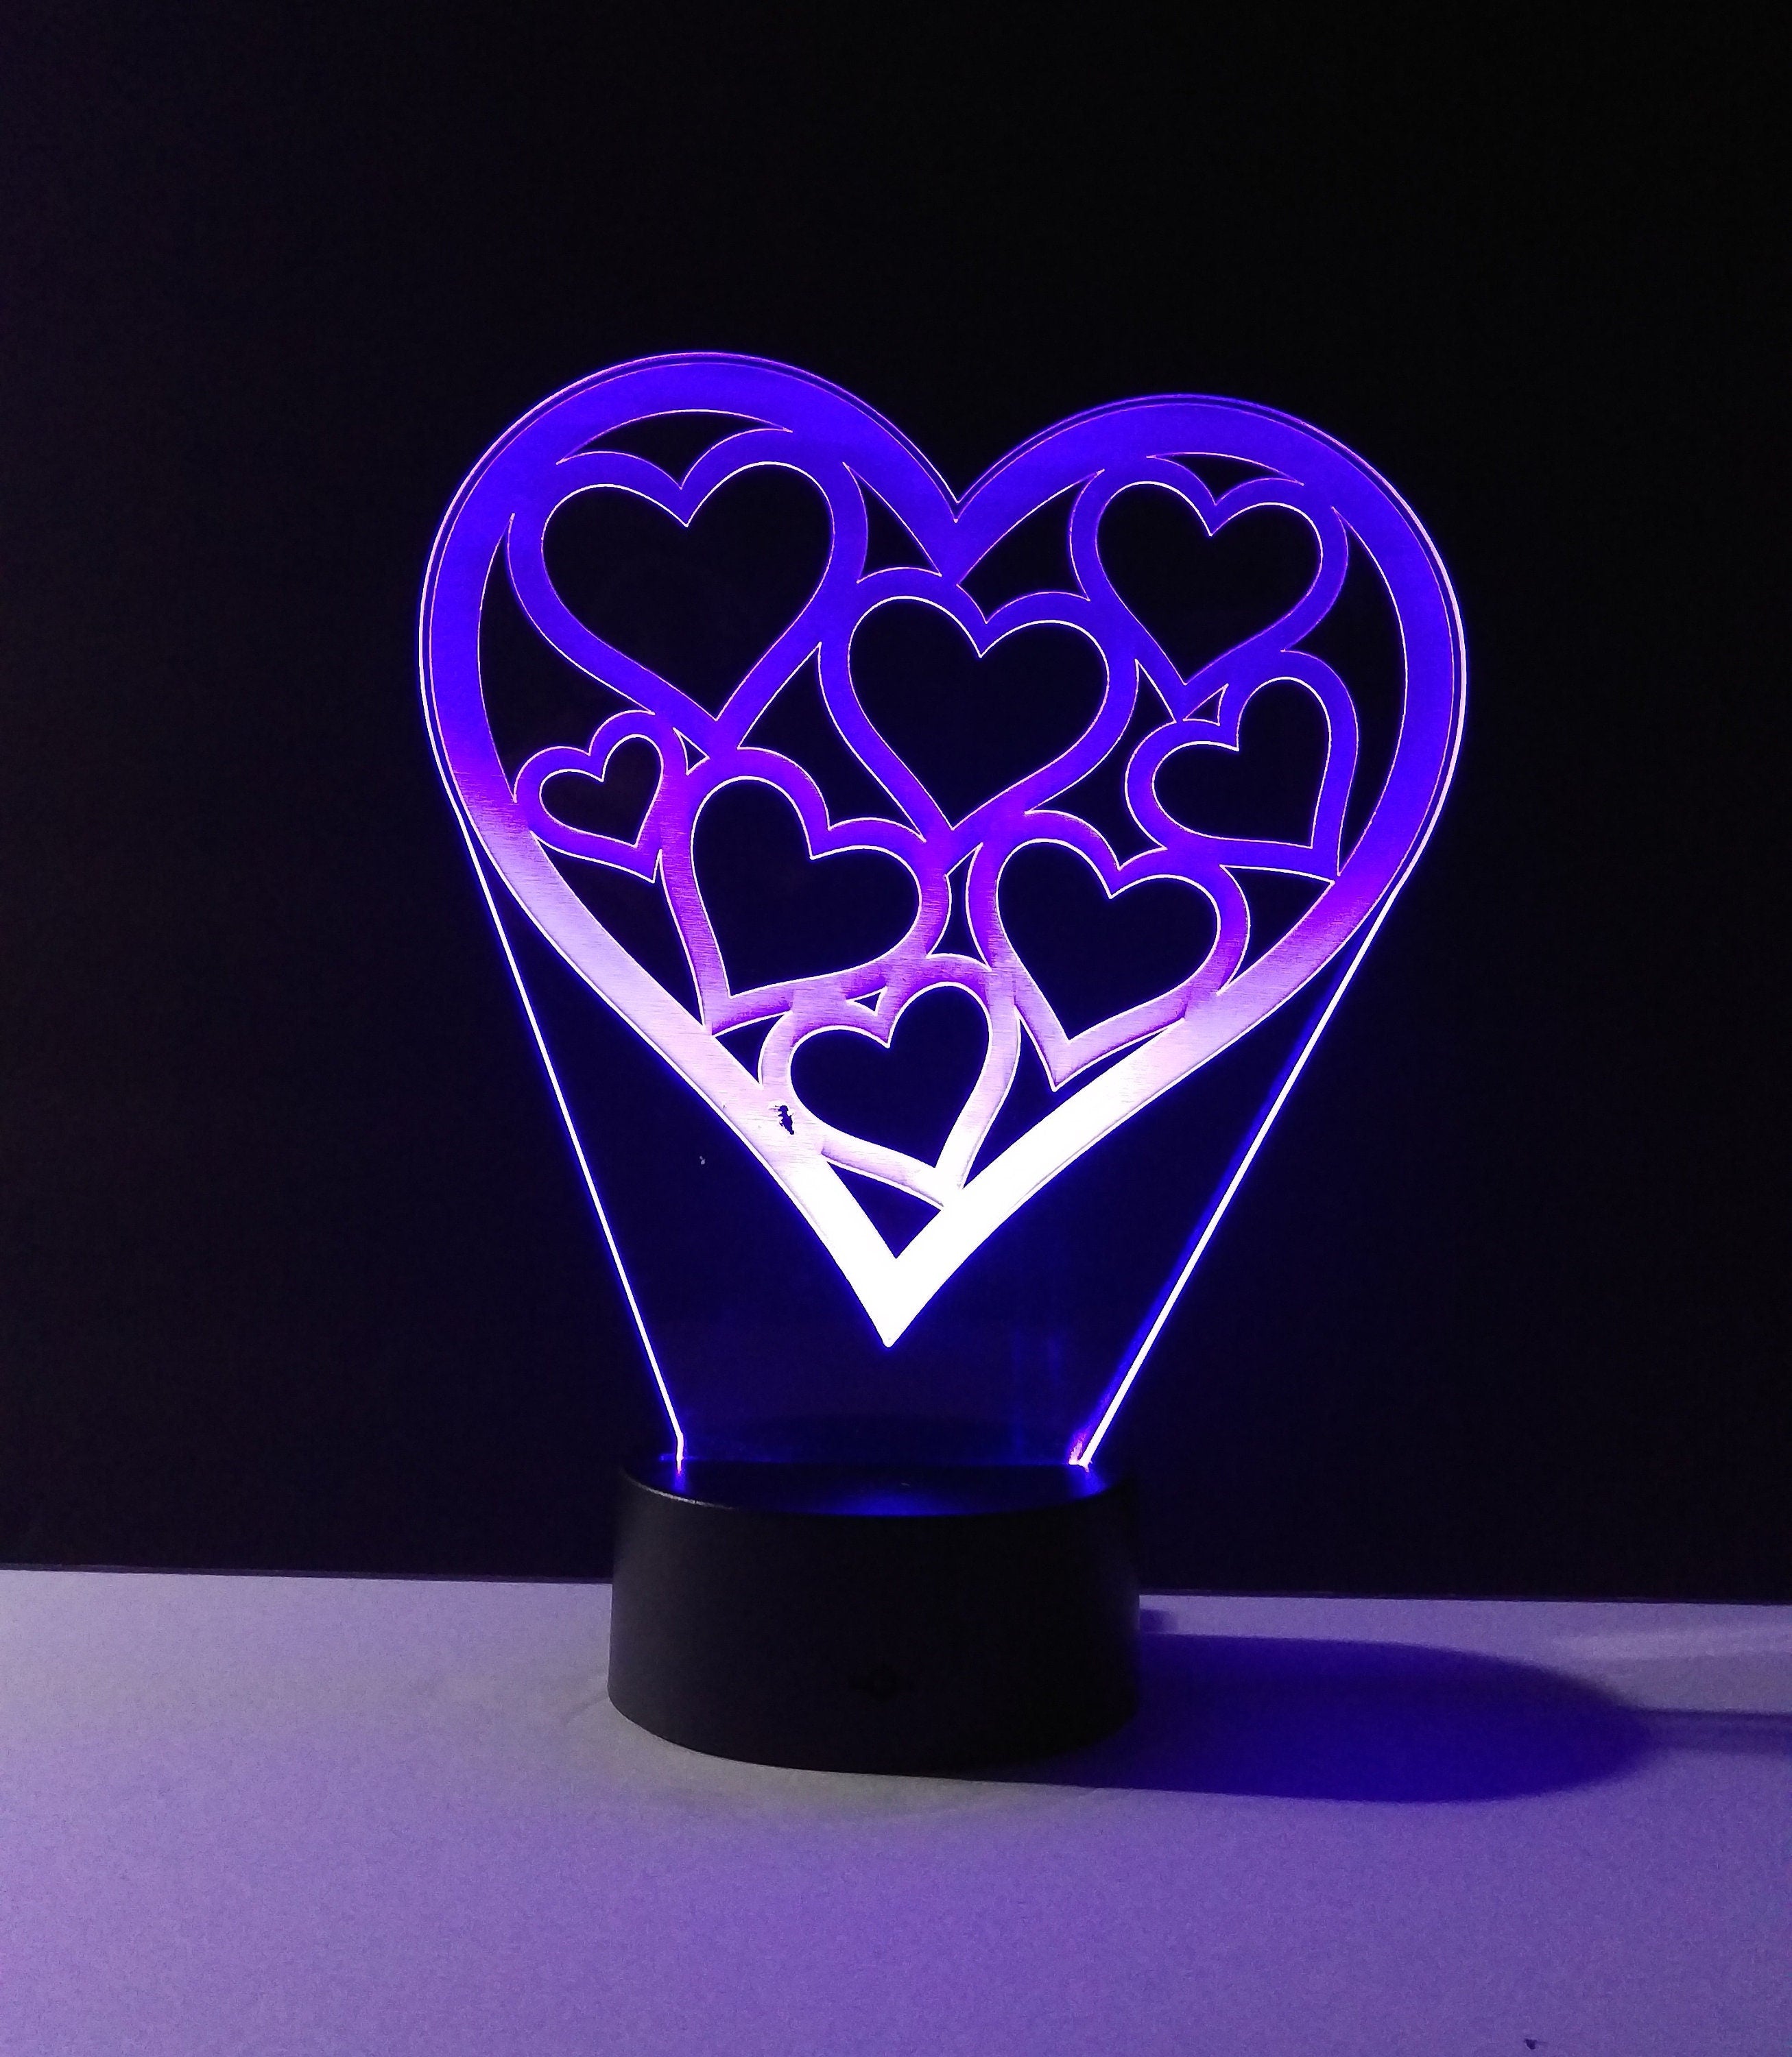 Awesome "Hearts in a Heart" LED Lamp (1119) - FREE SHIPPING!